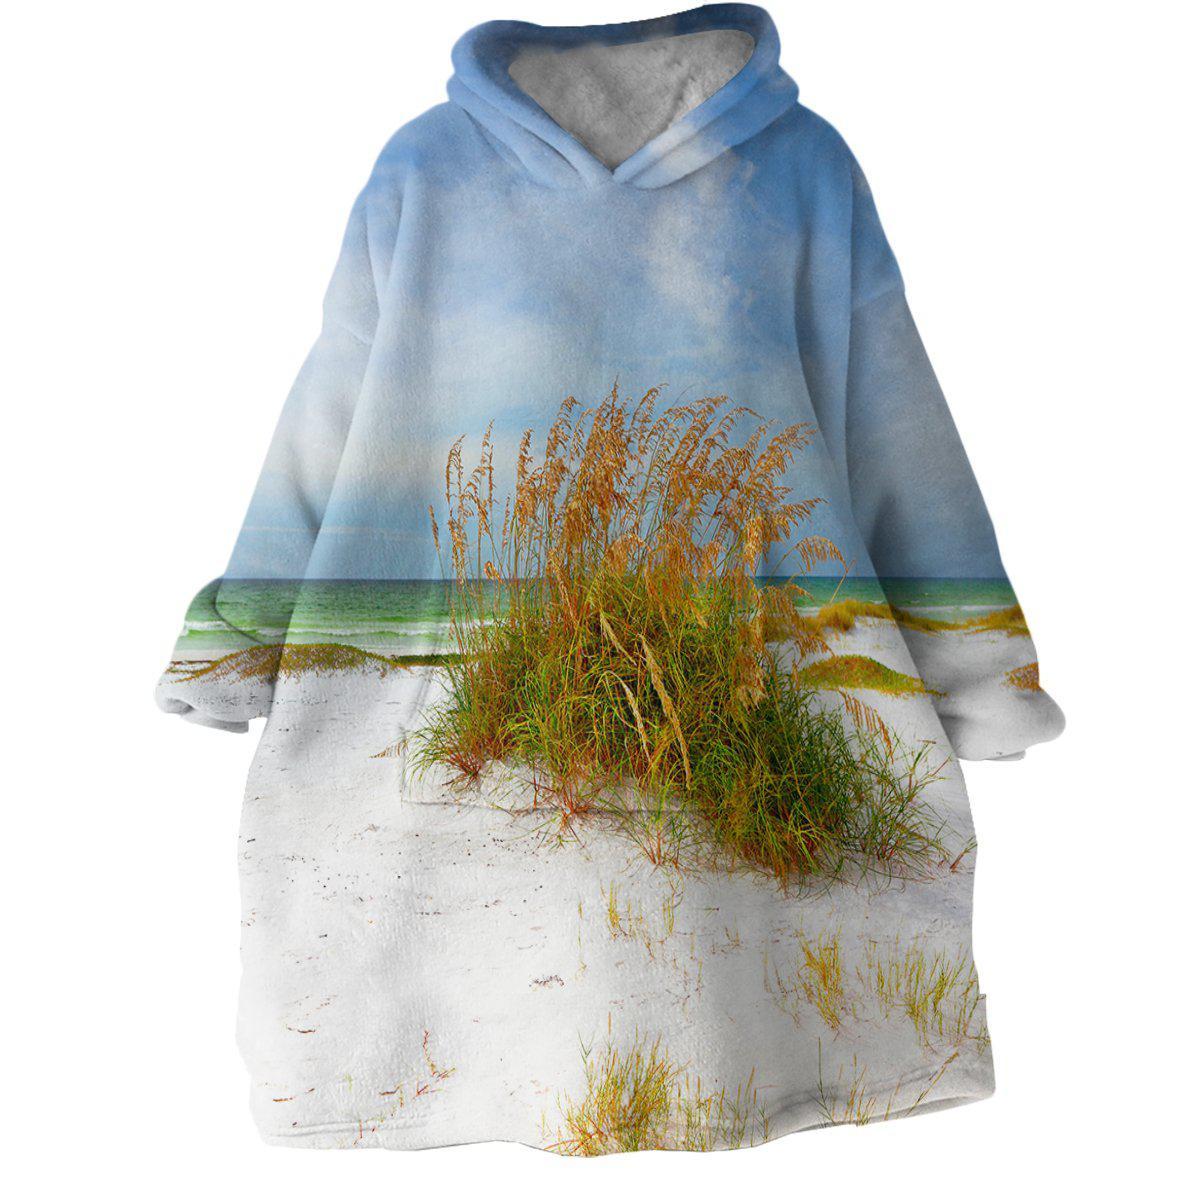 The Blanket Hoodie  Oversized Wearable Blankets at Affordable Prices